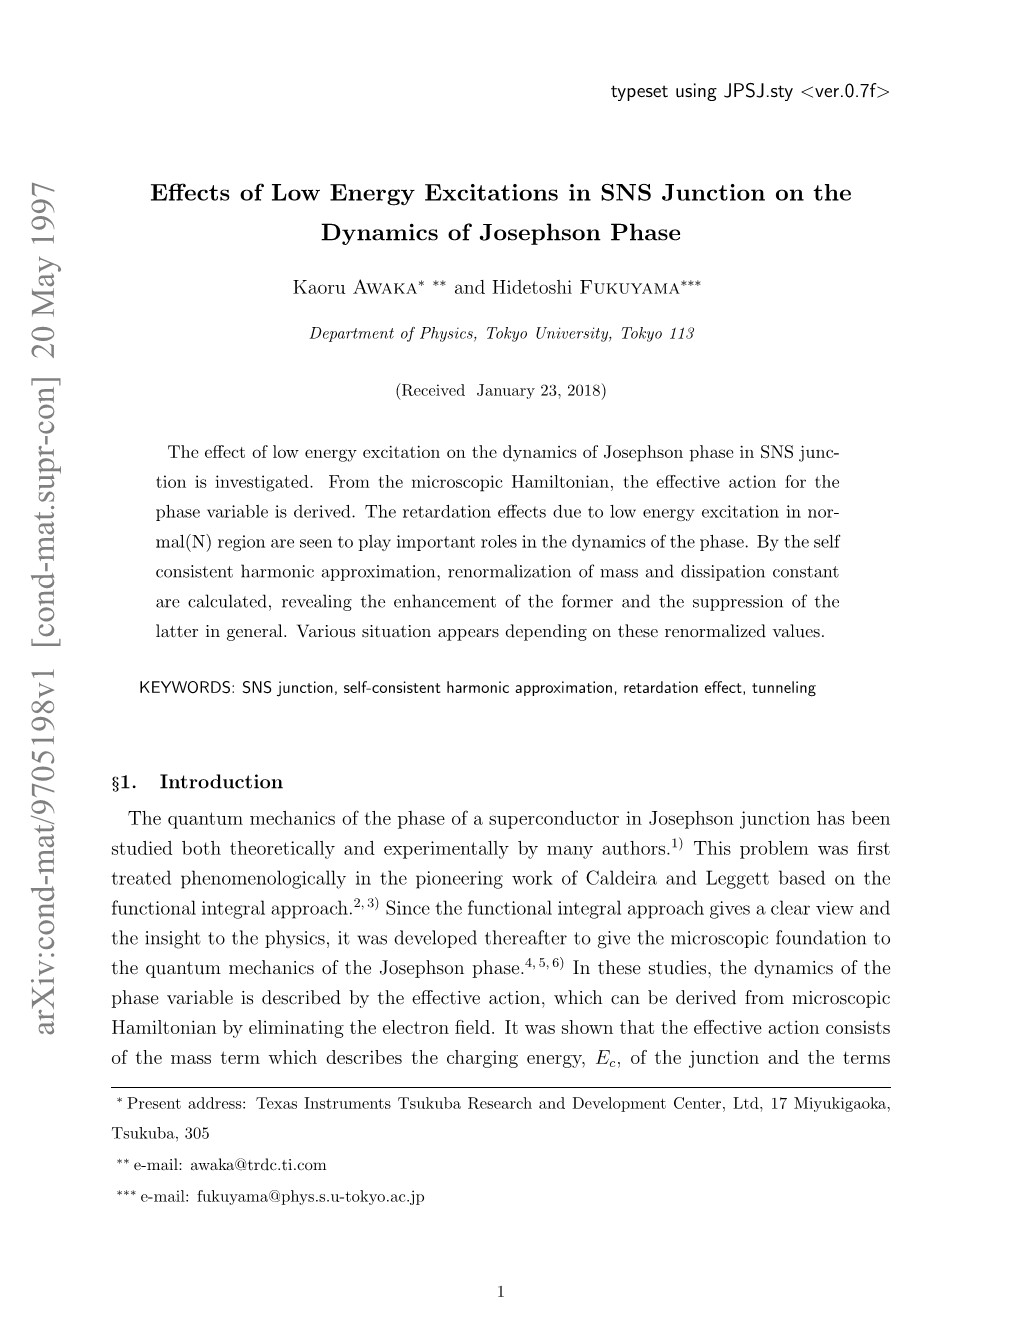 Effects of Low Energy Excitations in SNS Junction on the Dynamics Of